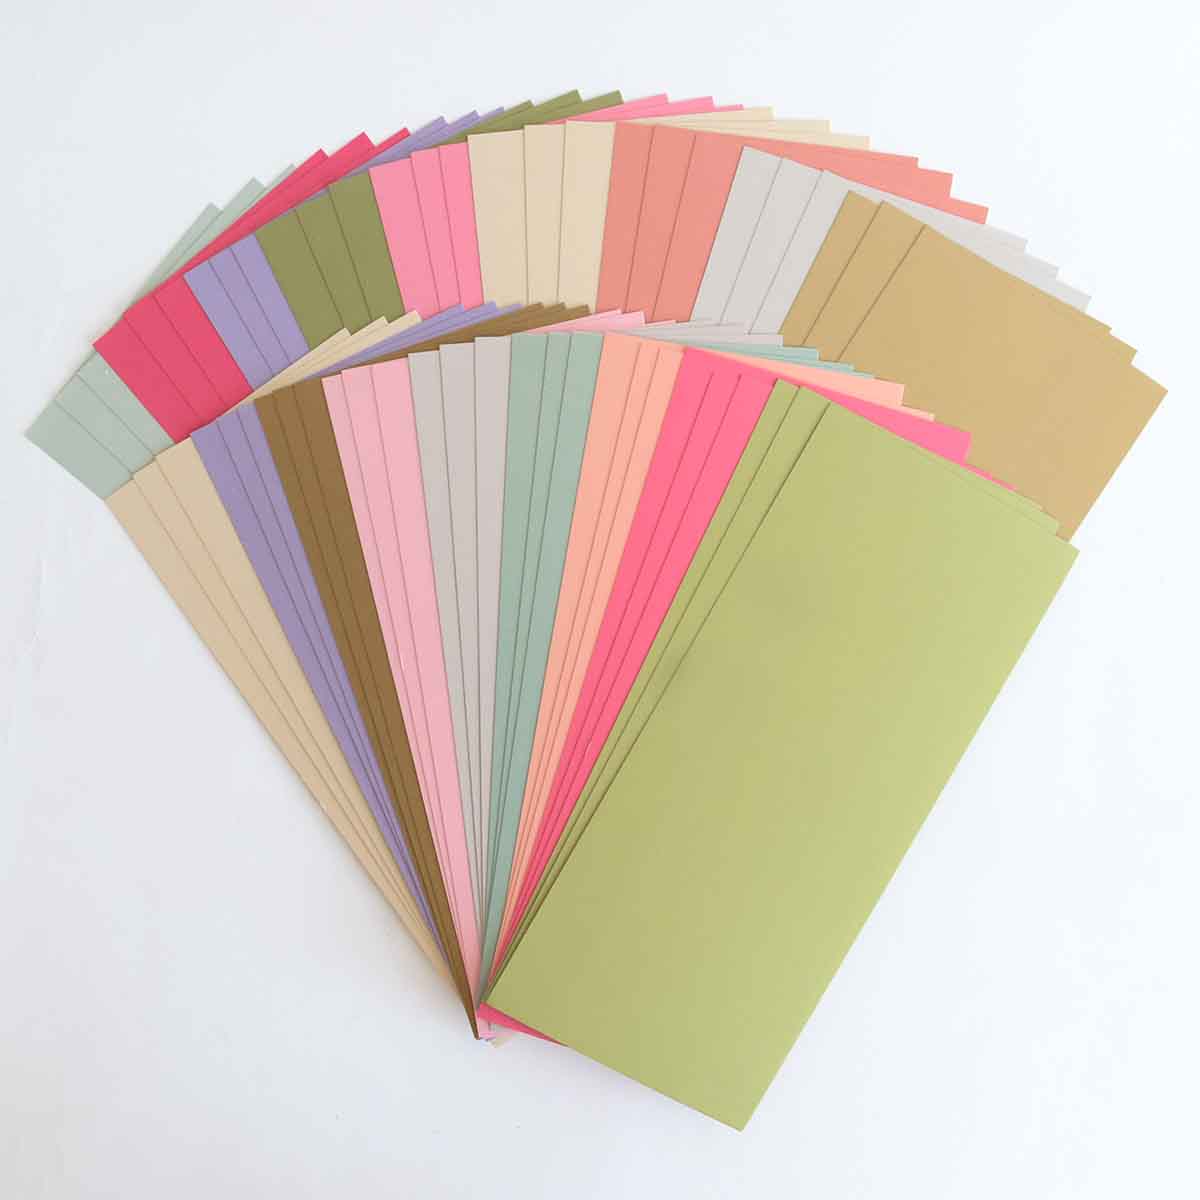 a bunch of different colored papers on a white surface.